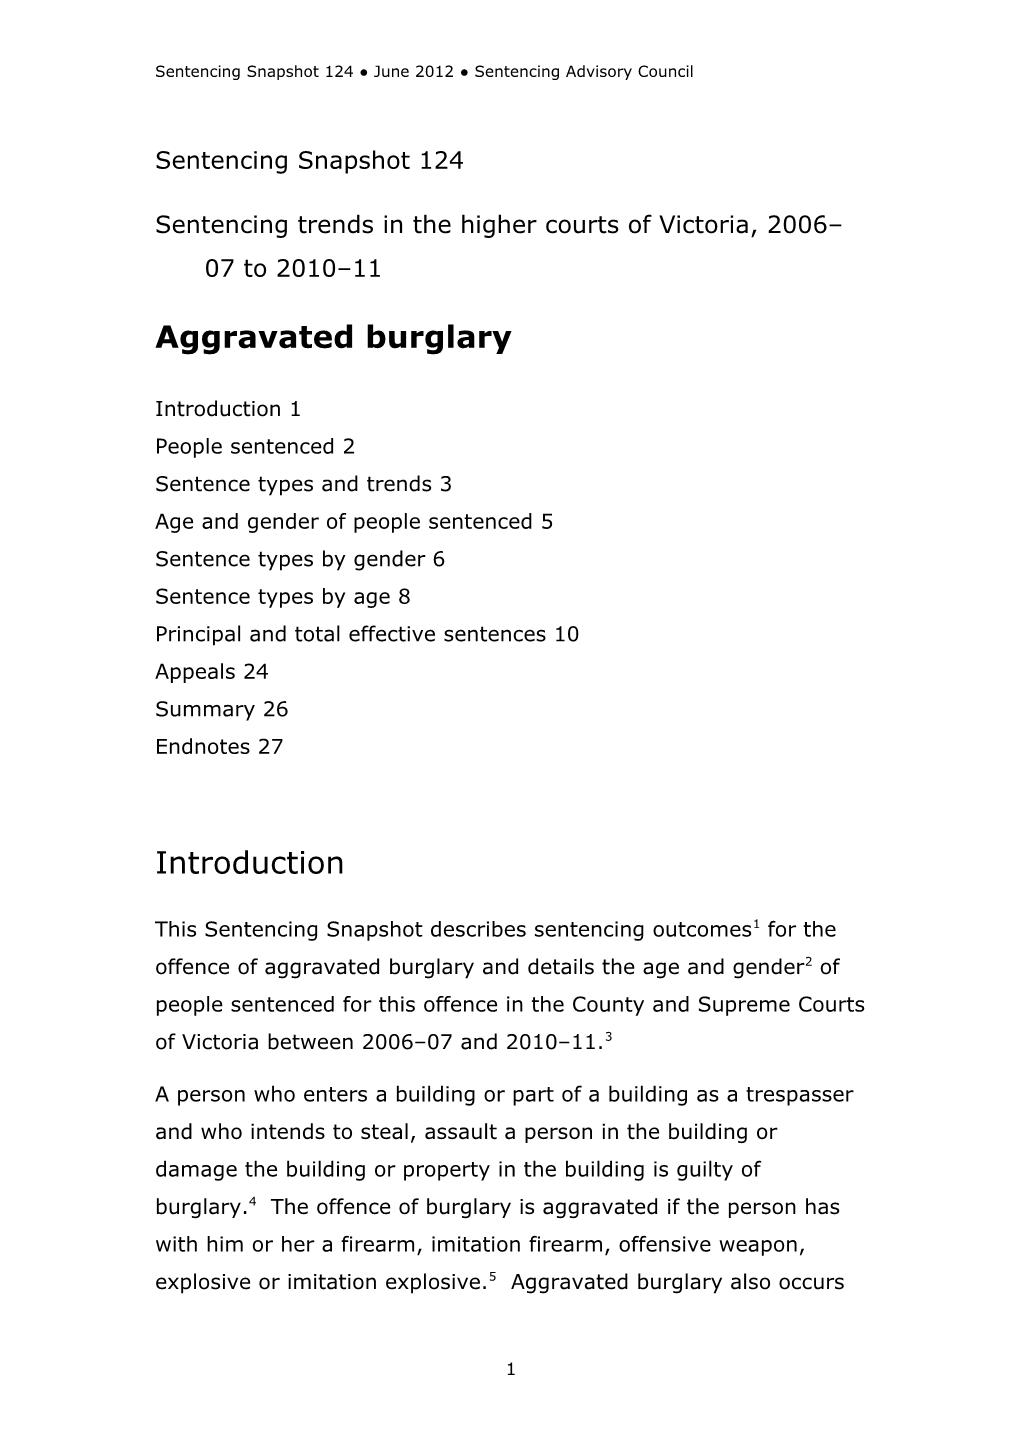 Sentencing Trends for Aggravated Burglary in the Higher Courts of Victoria, 2006 07 to 2010 11